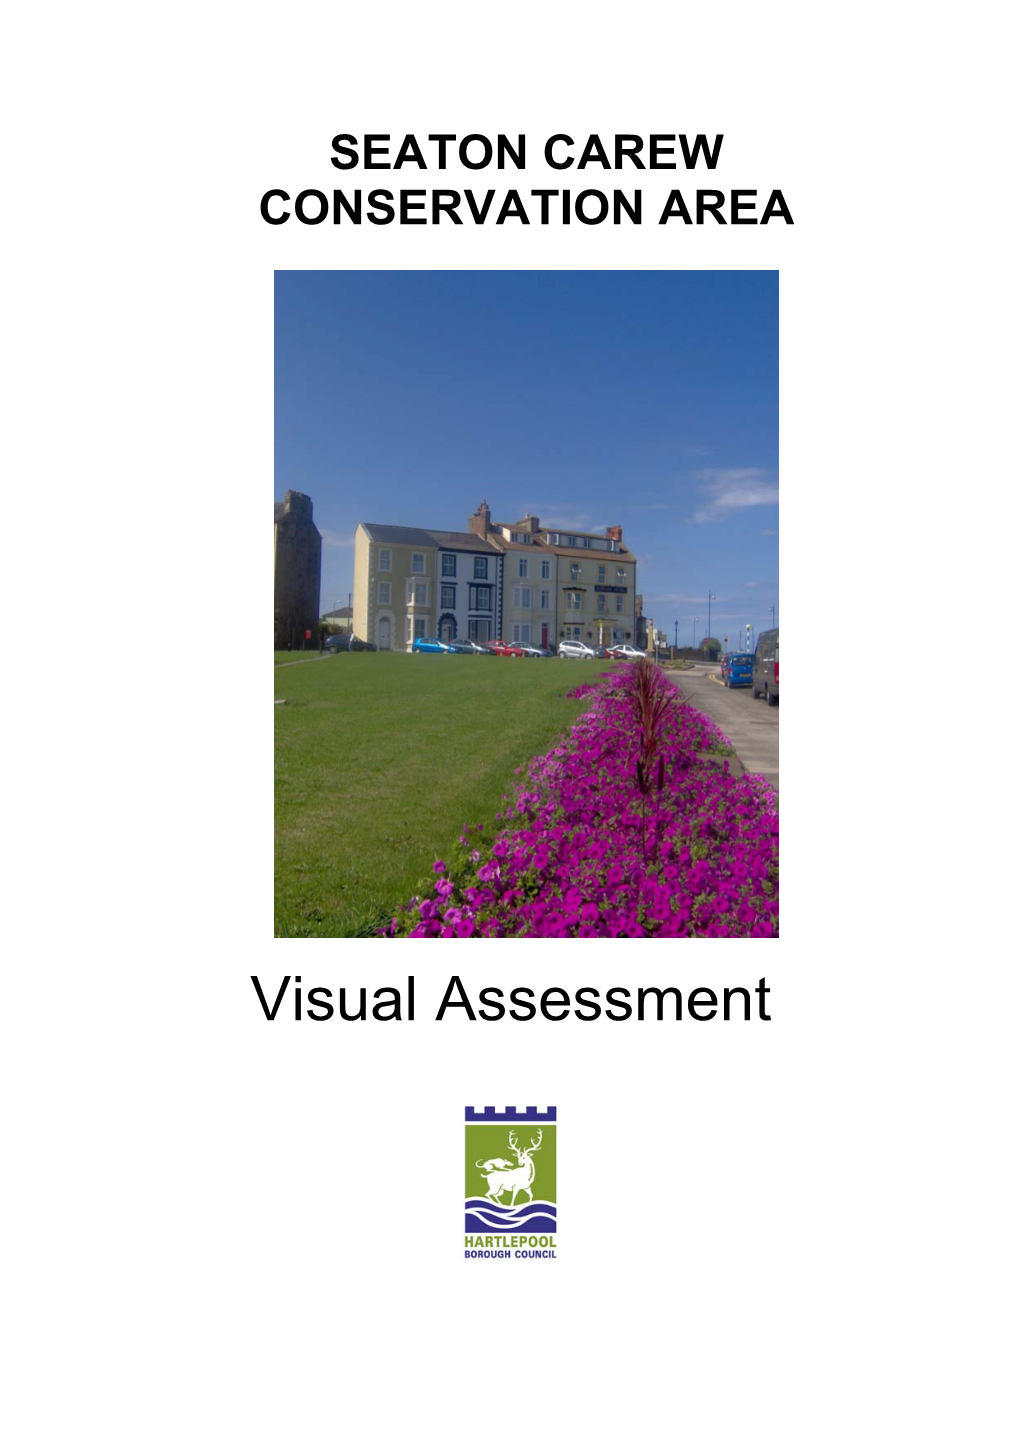 Seaton Carew Conservation Area Visual Assessment